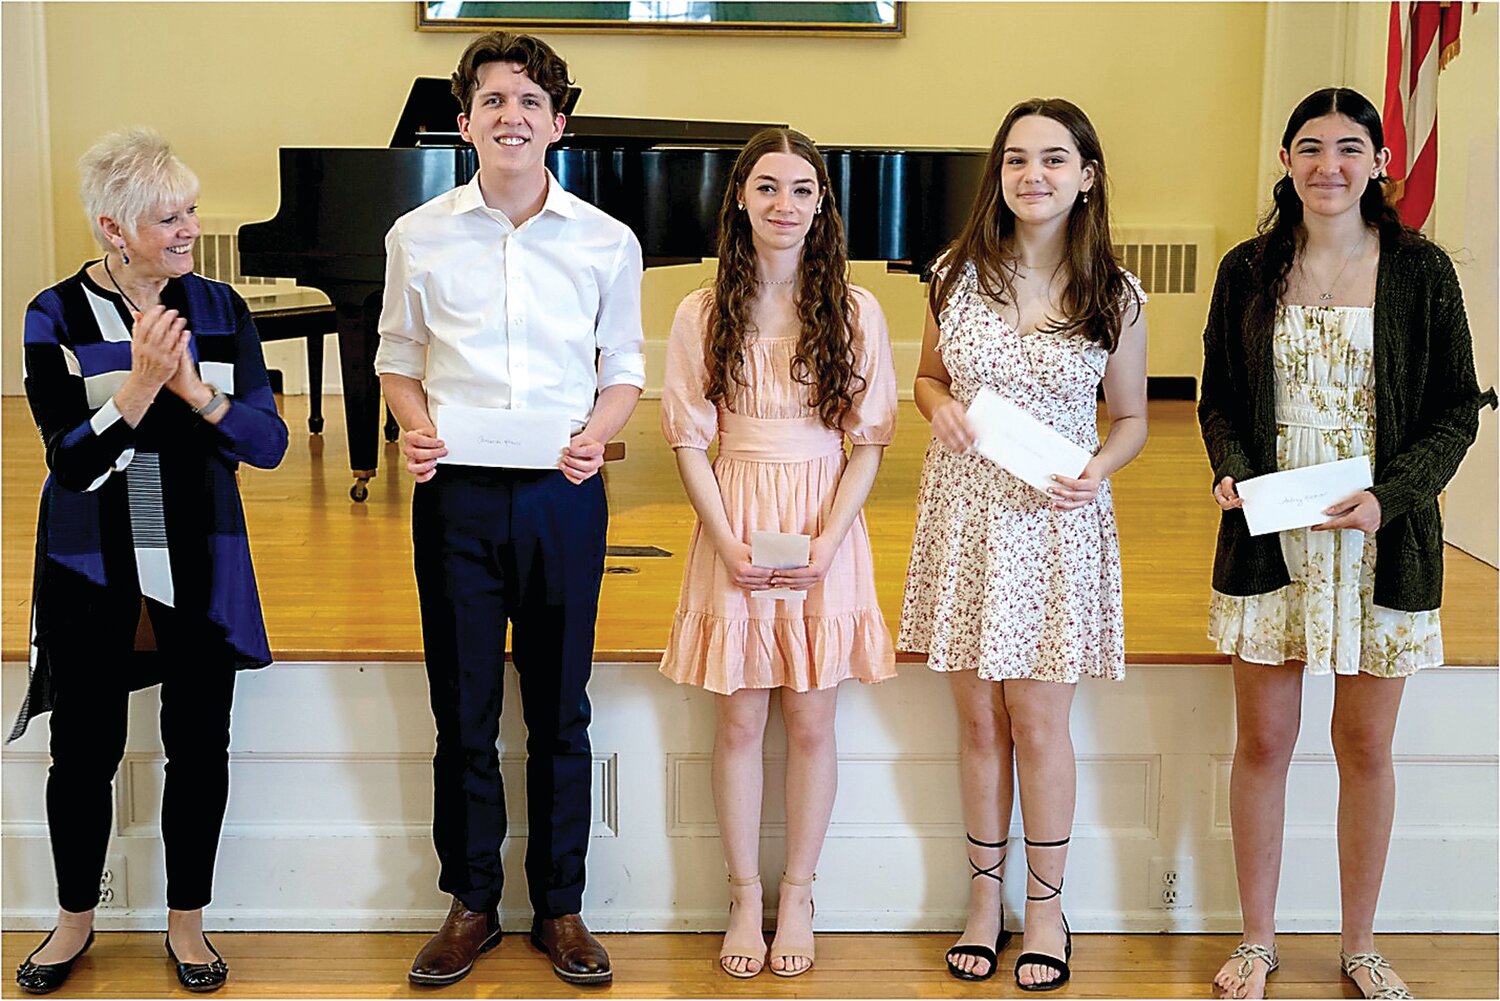 Voices of the Future finalists with BCCS Assistant Conductor Susan Johnson are, from left, Cameron Krauss, Helena Badiali, Olivia Giampolo, and Audrey Gaona.